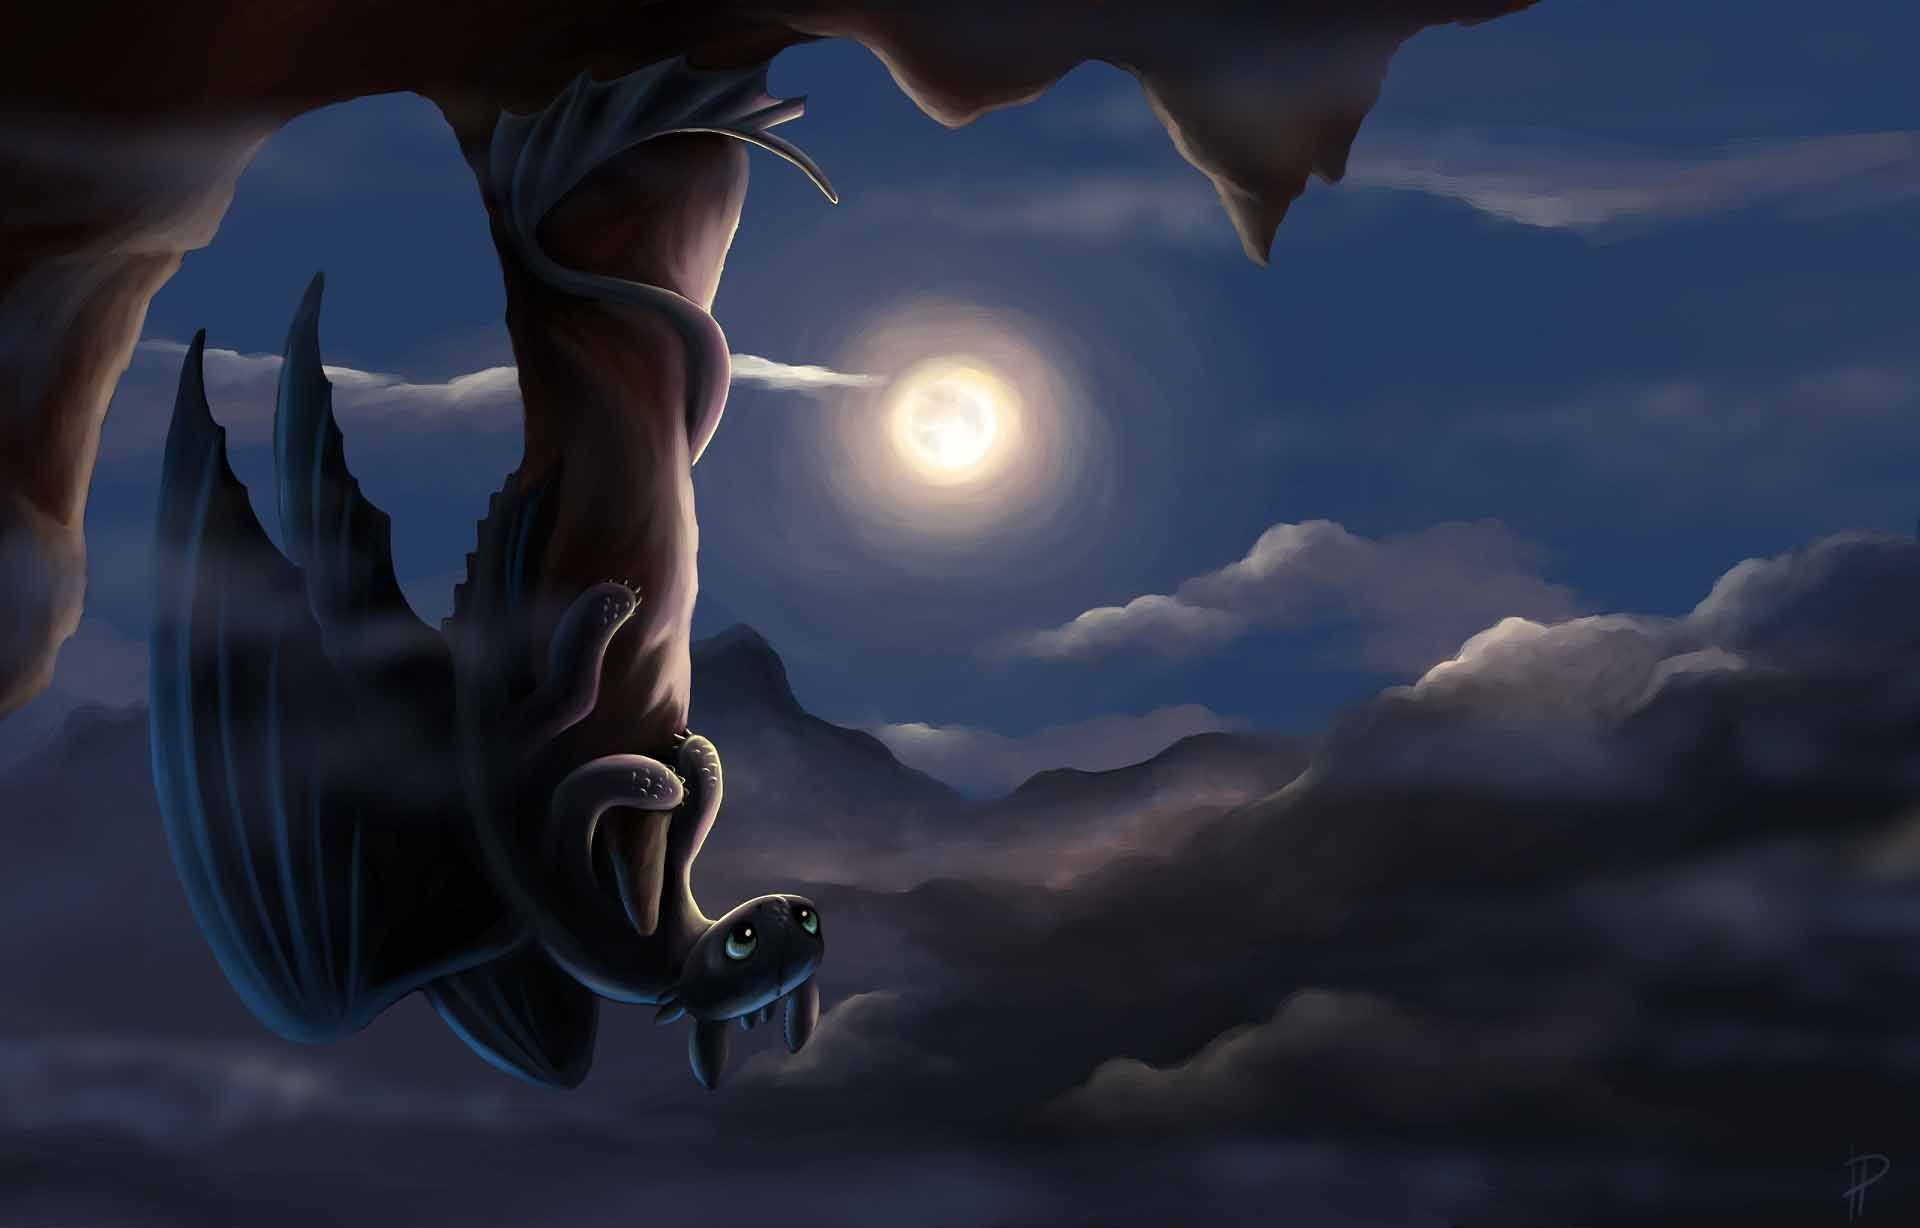 How to Train Your Dragon - Night Fury artwork - Wallpaper #1756 on ...